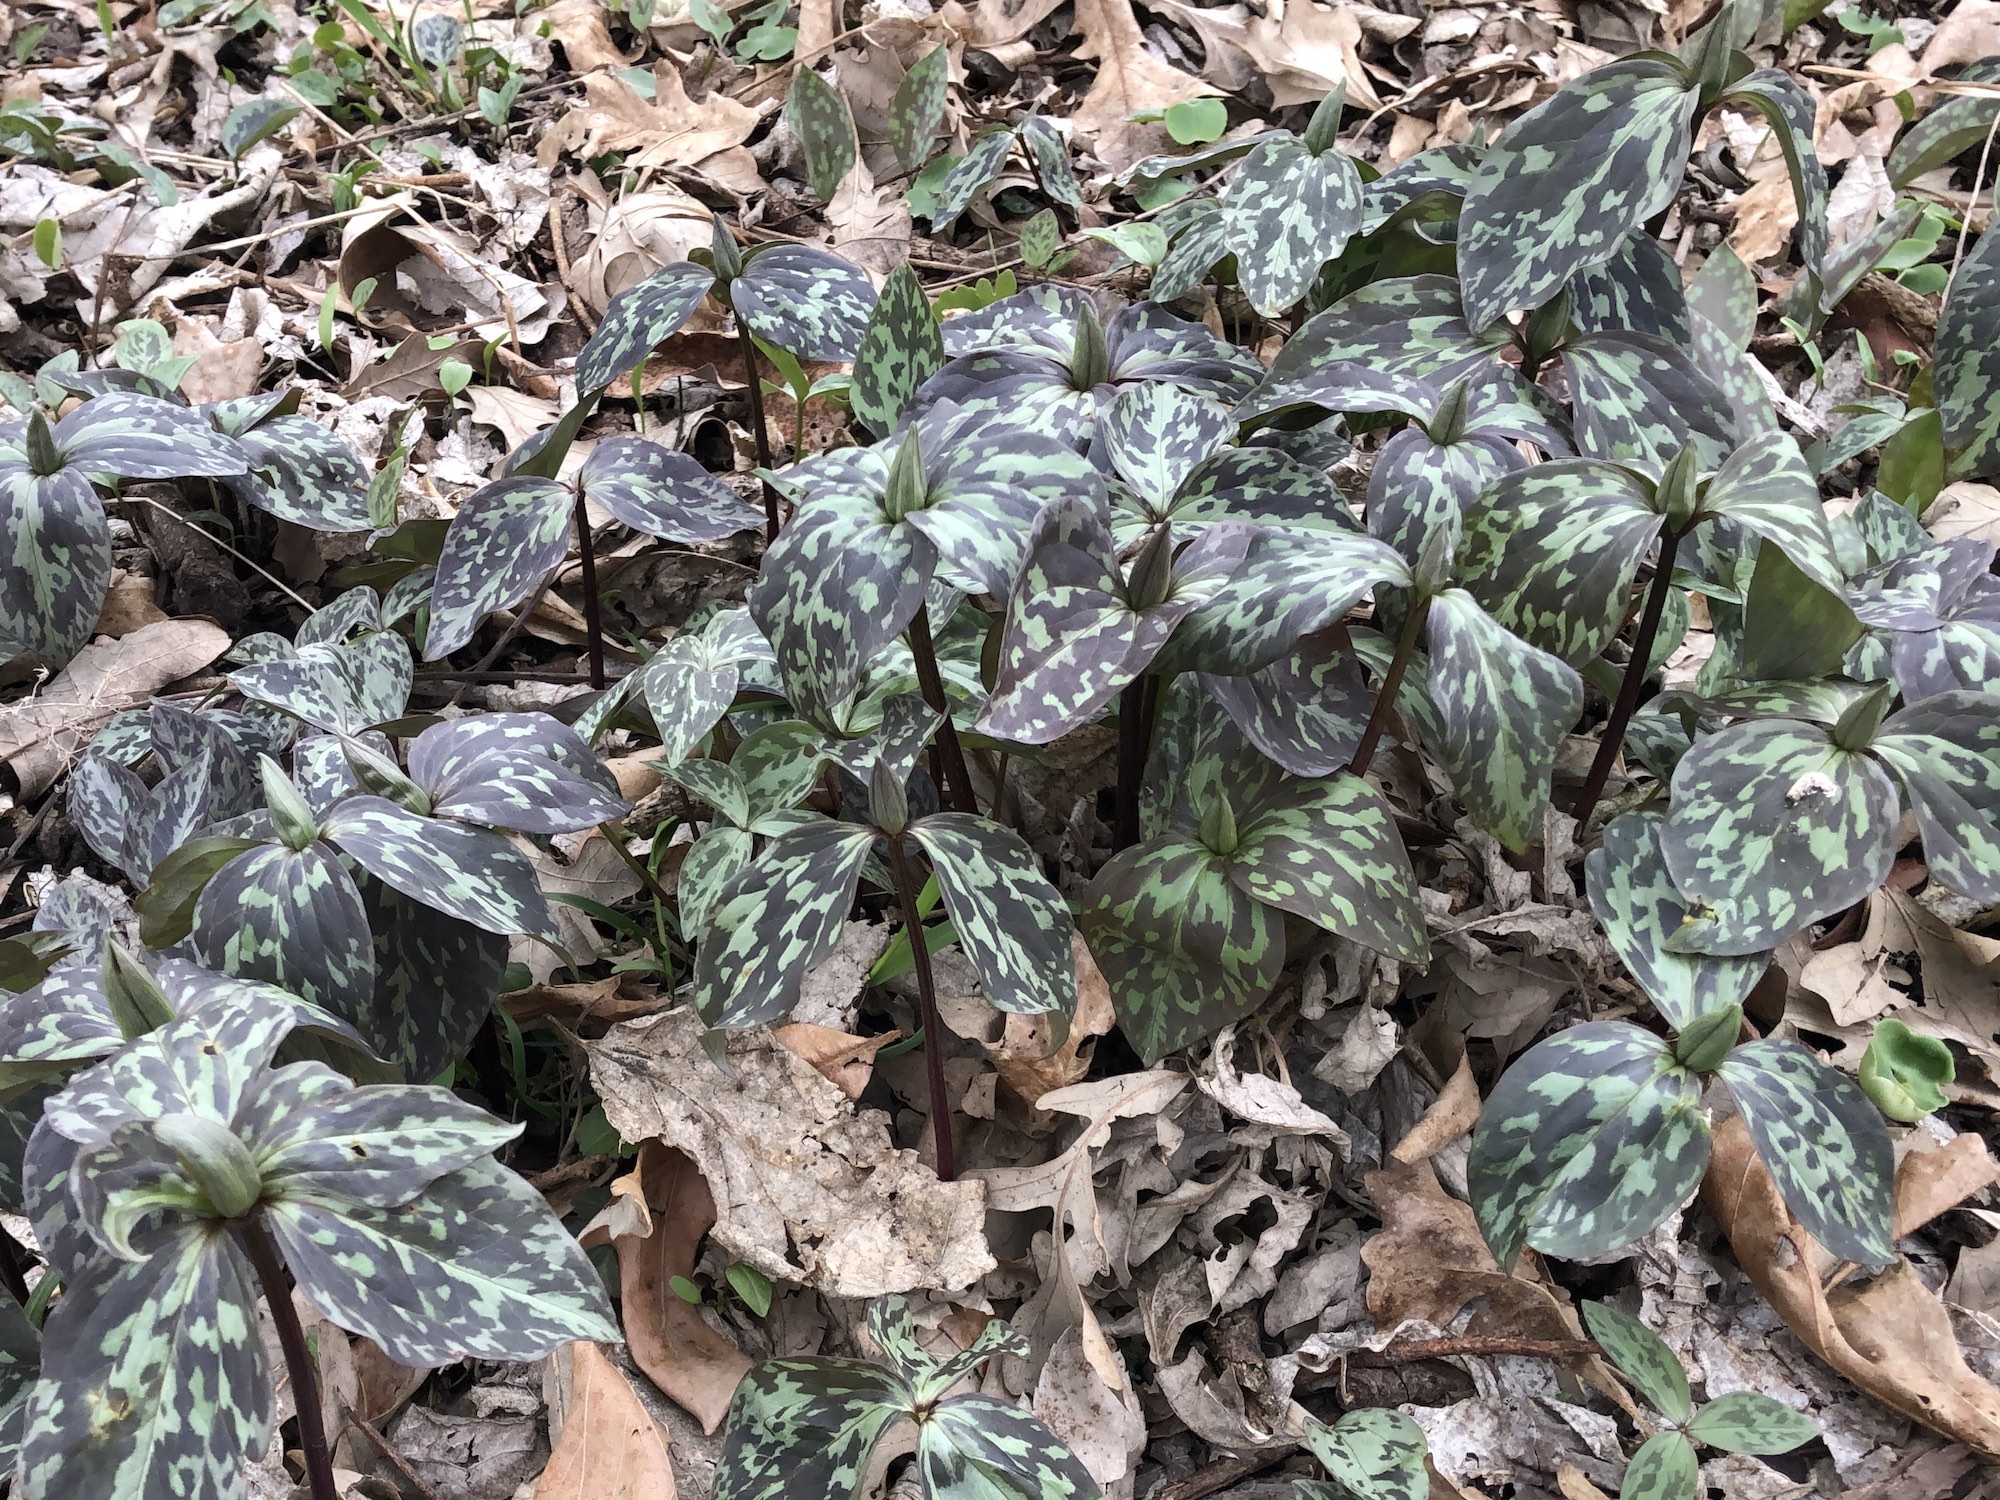 Trillium off of bike path between Marion Dunn and Duck Pond on April 18, 2019.